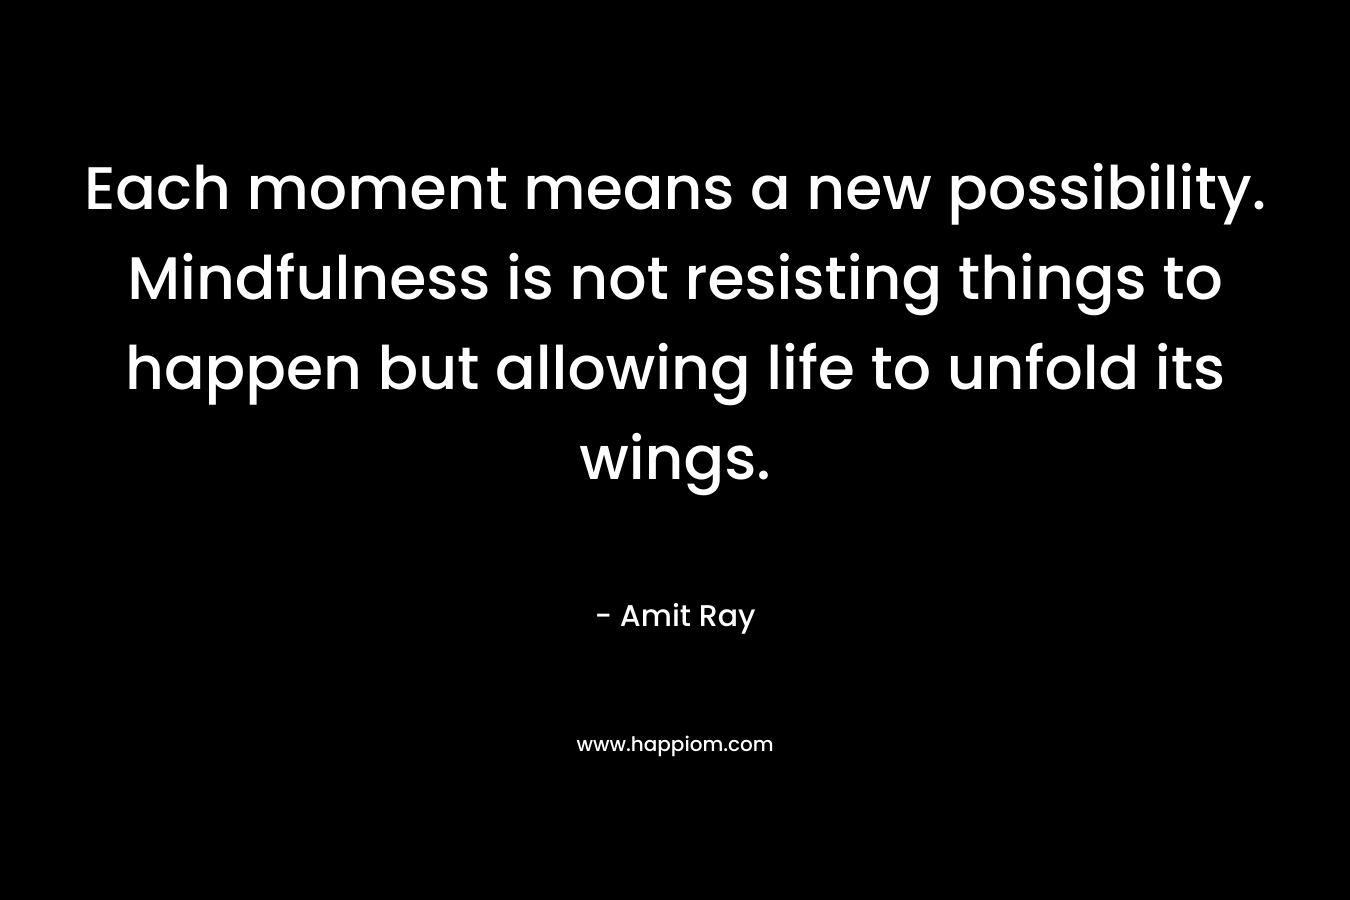 Each moment means a new possibility. Mindfulness is not resisting things to happen but allowing life to unfold its wings. – Amit Ray